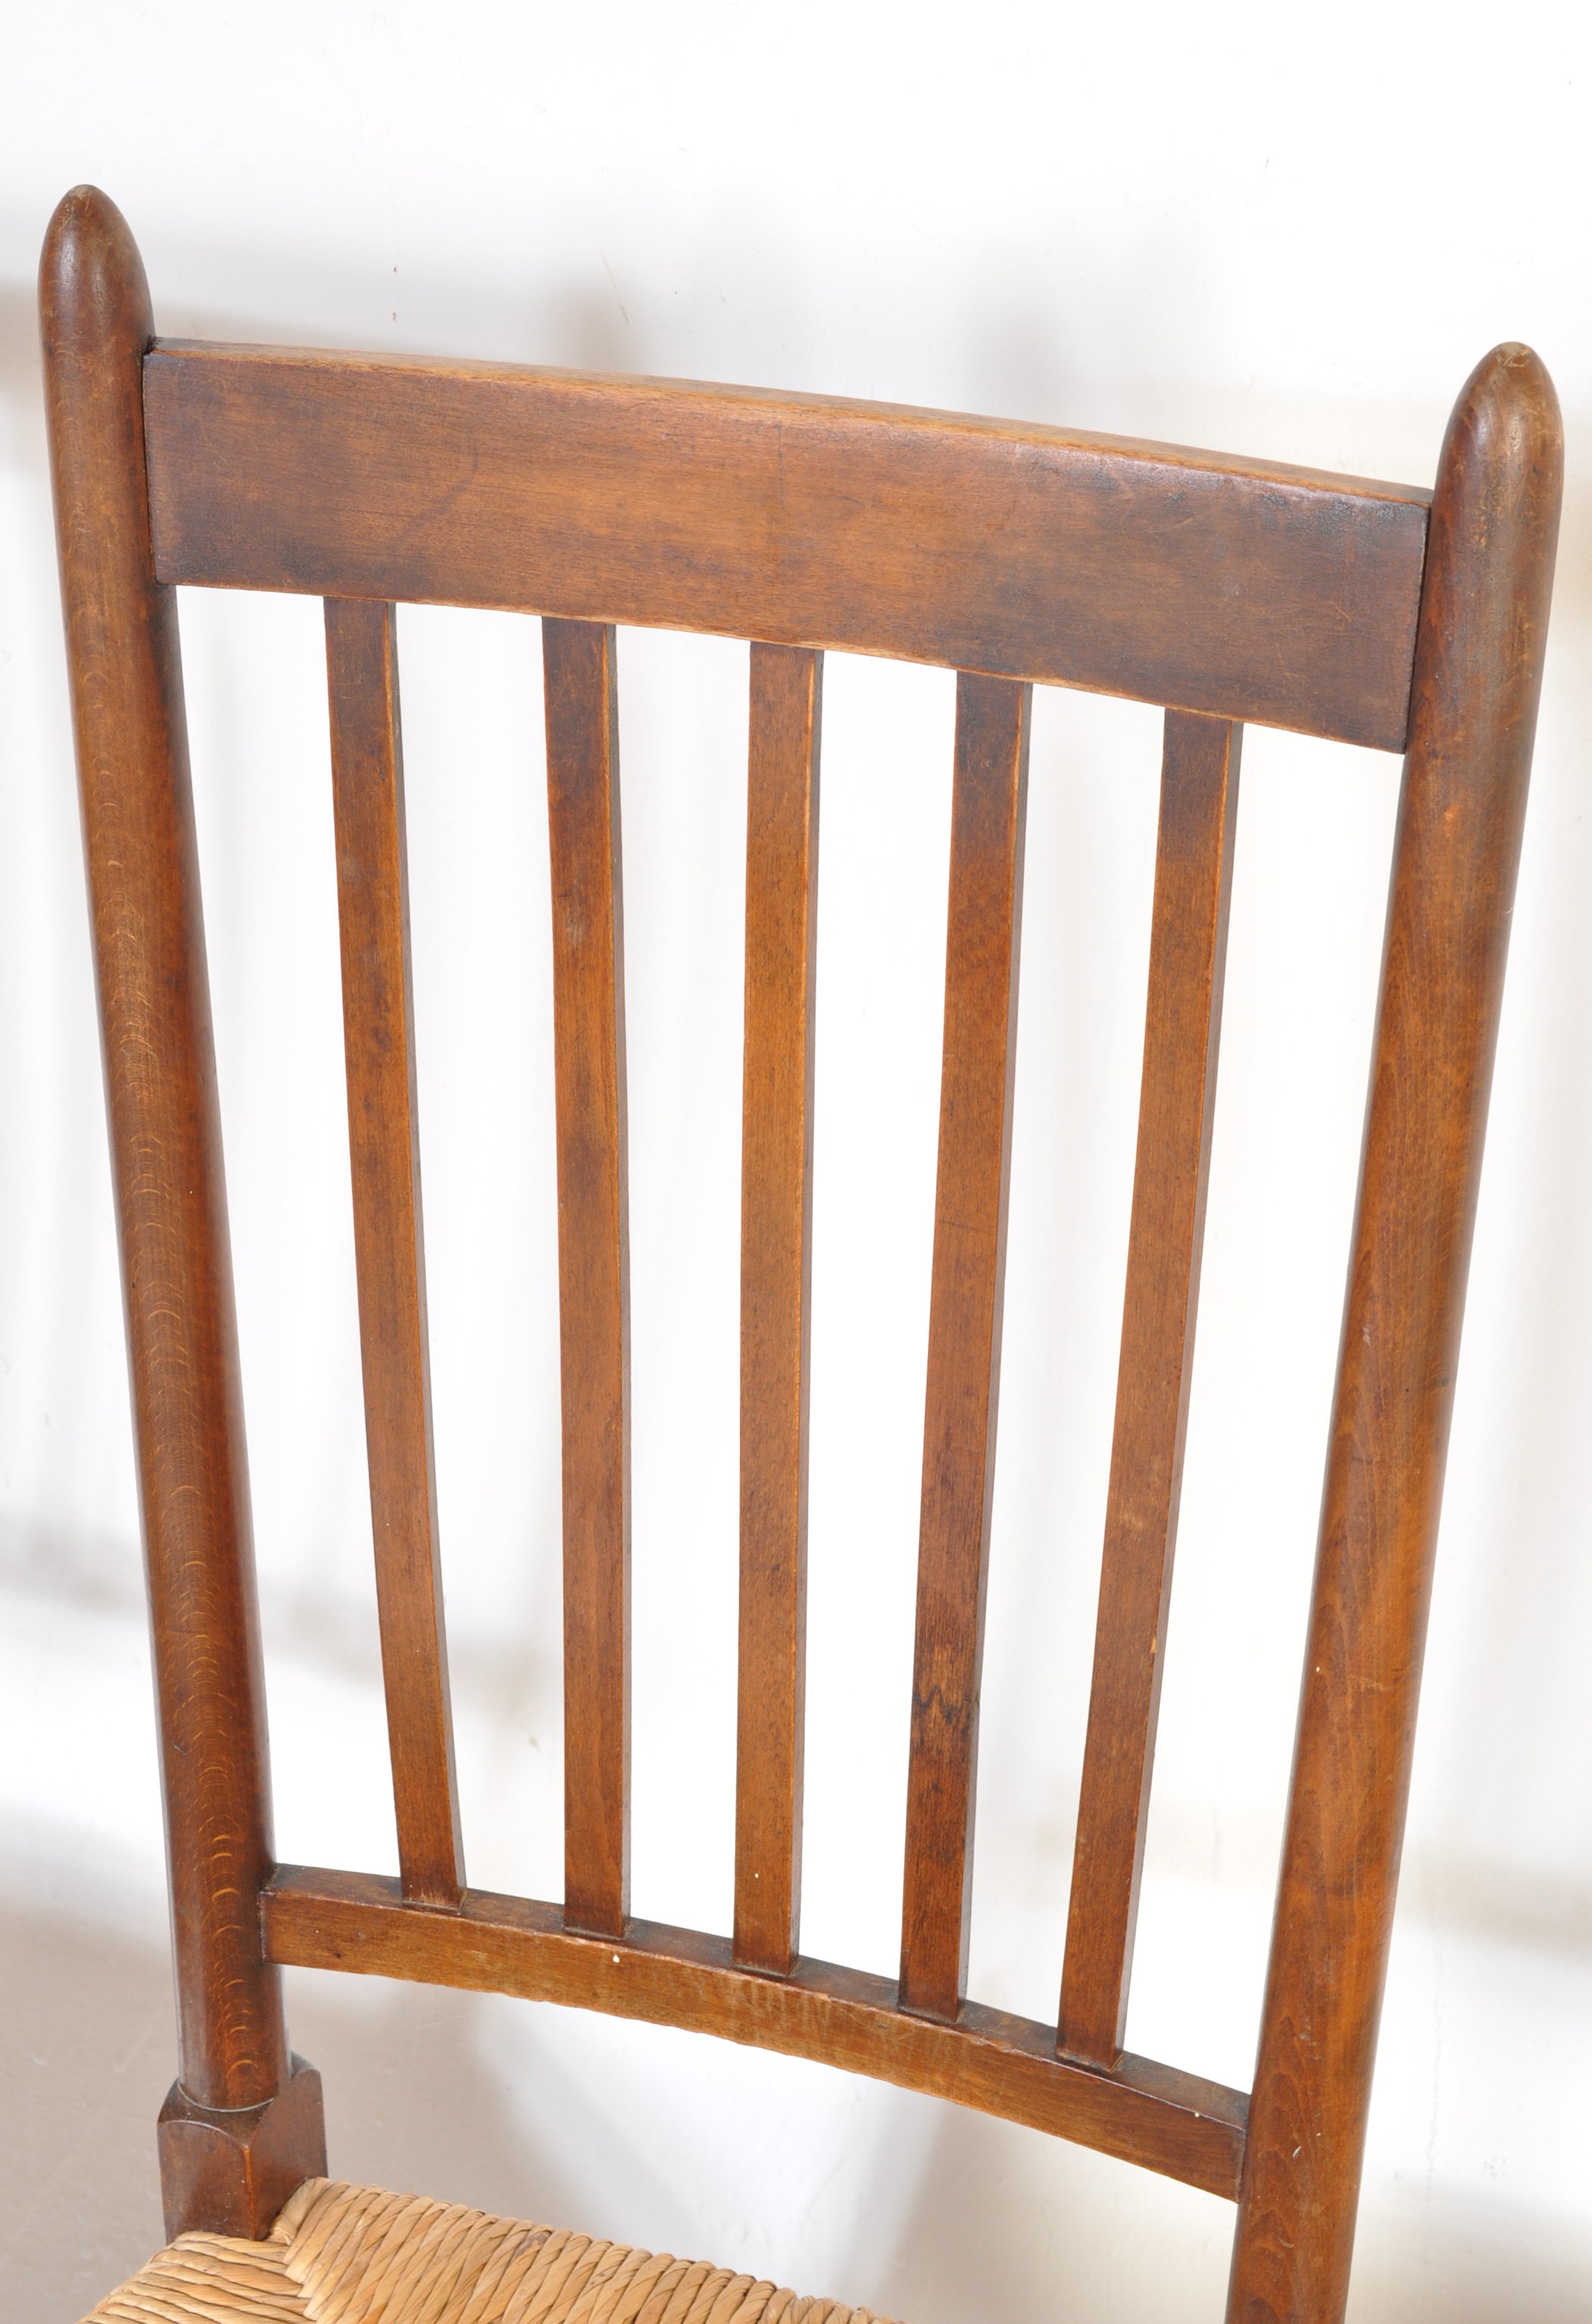 FOUR VINTAGE MID 20TH CENTURY COUNTRY FARM HOUSE CHAIRS - Image 4 of 7